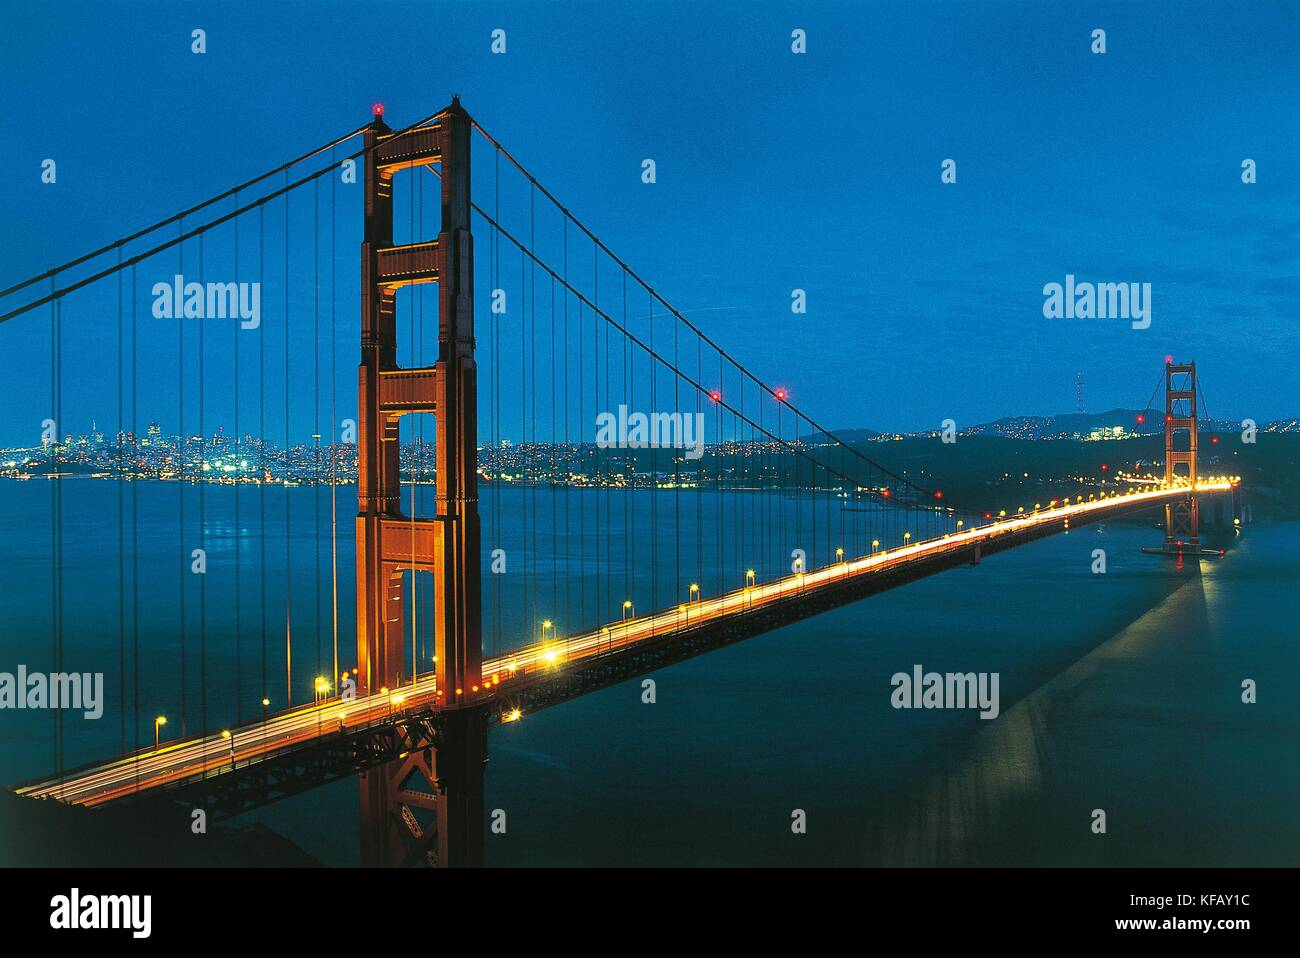 United States Of America California San Francisco The Golden Gate Bridge In The Background To The 1937 San Francisco Bay And The City 'Night Stock Photo